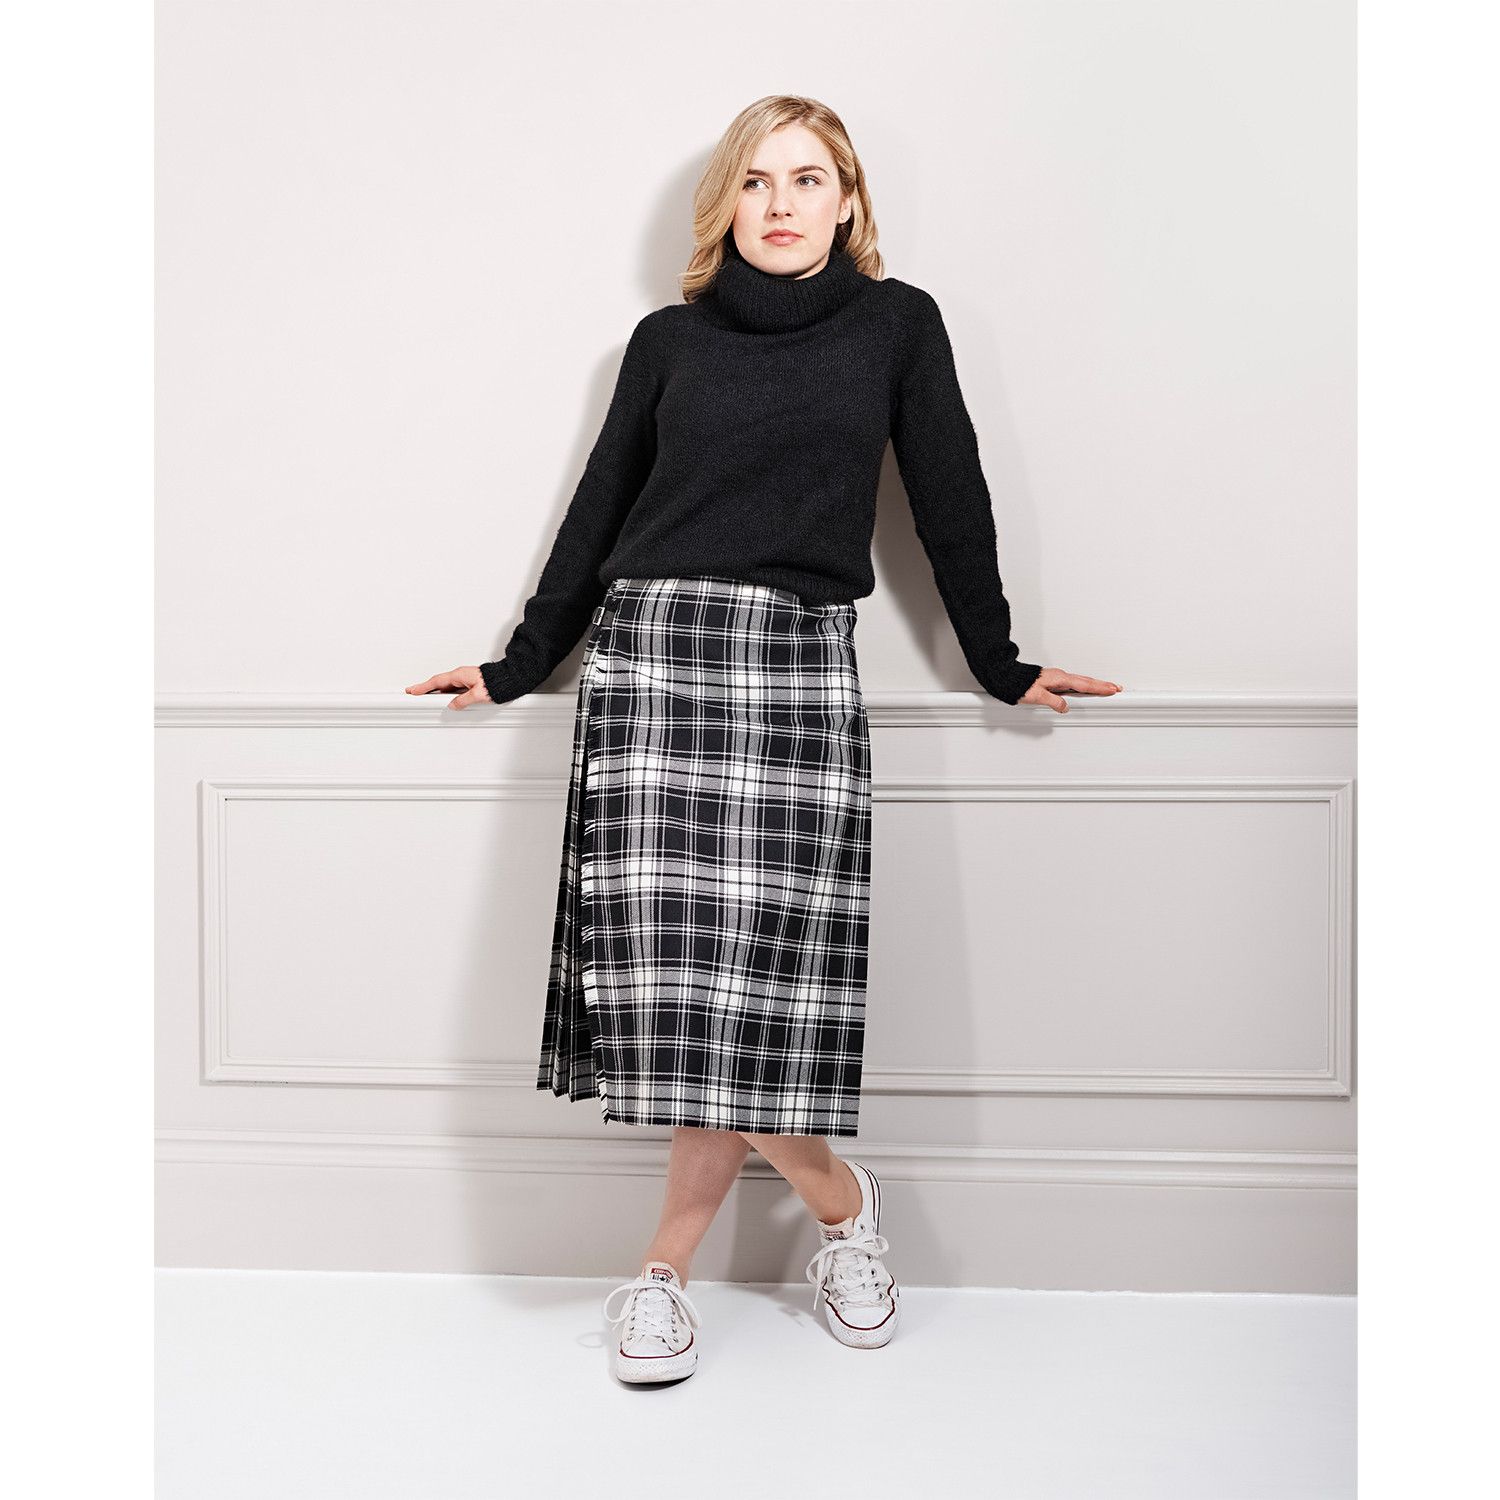 Kinloch Anderson Classic Kilted Skirt in Below the Knee Length Made to Order